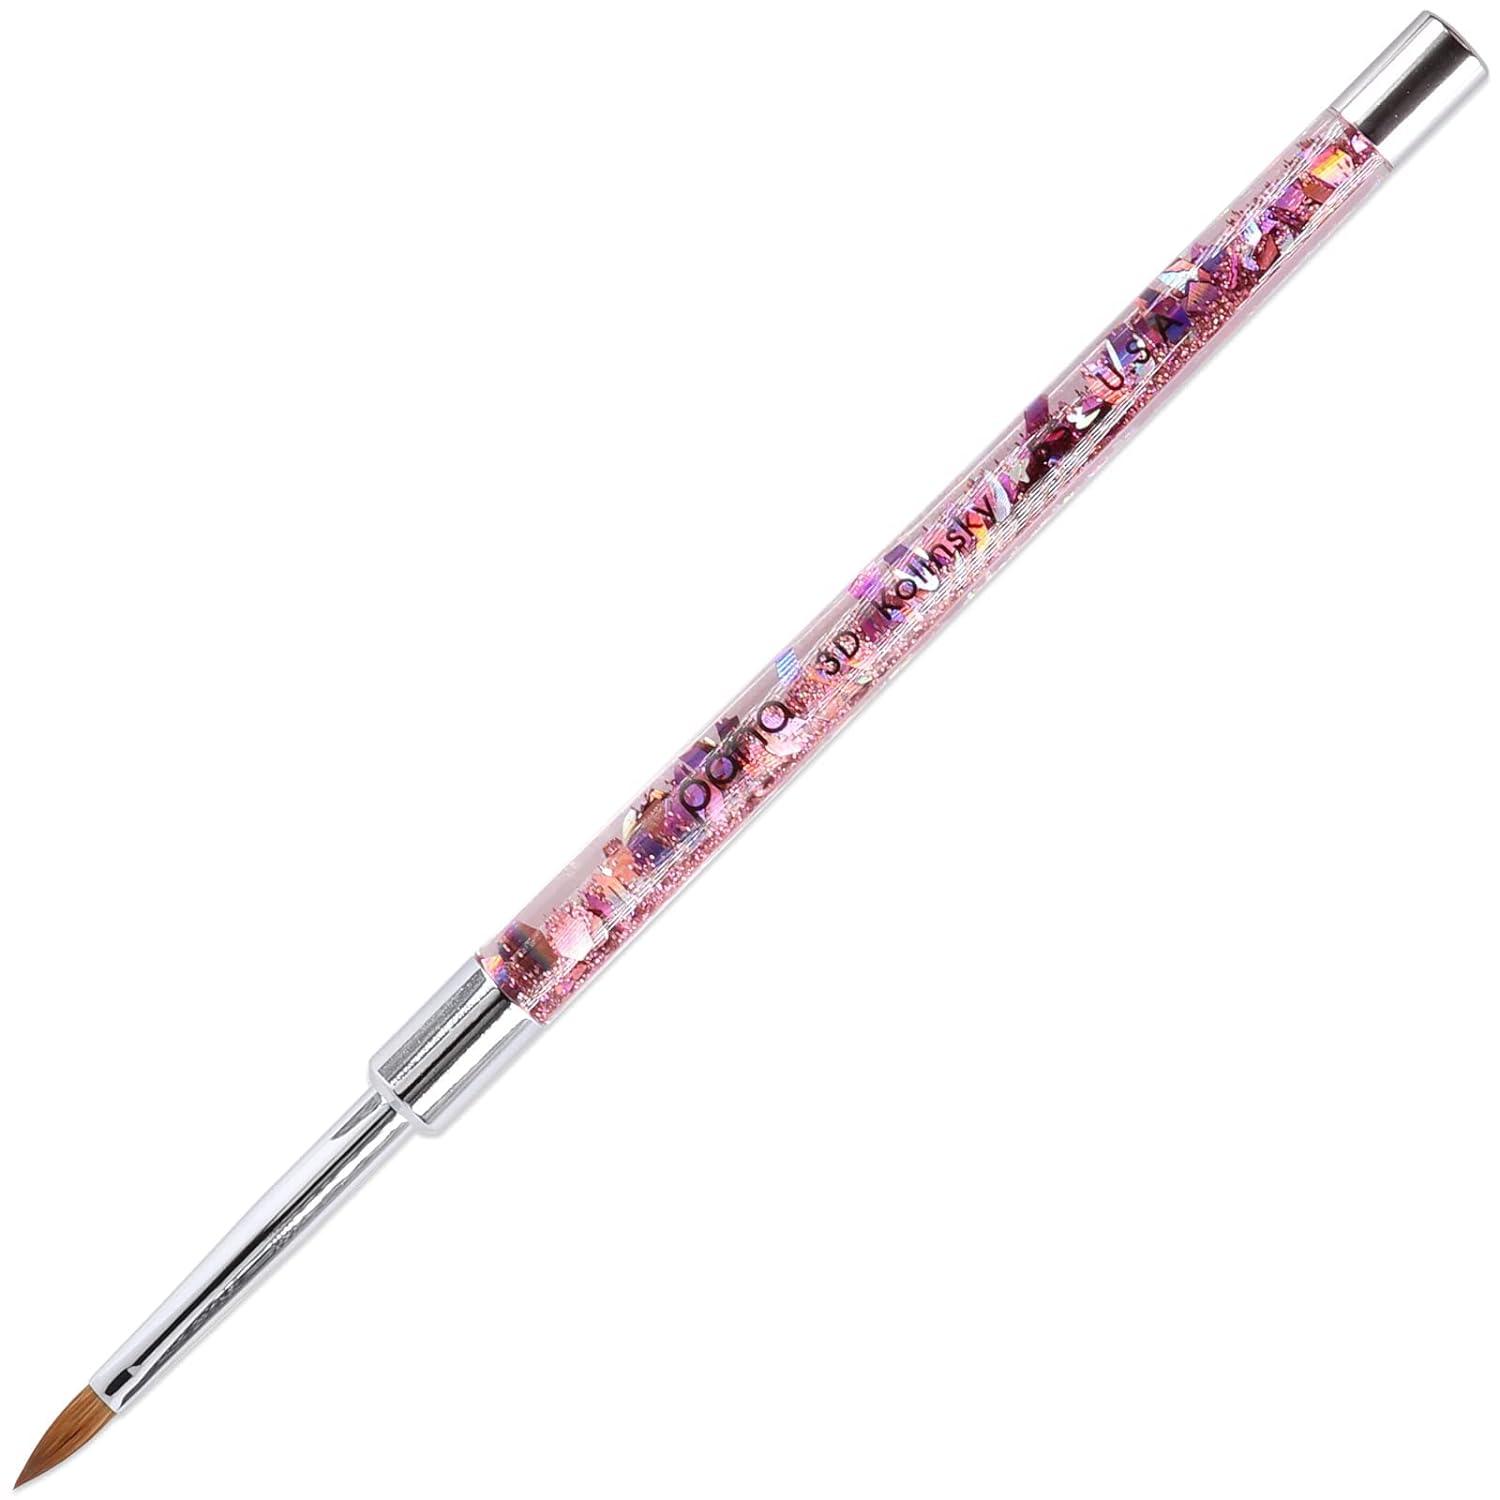 3D Sculpture Nail Art Brush with Glitter Pink Clear Acrylic Handle - Purple Phoenix Nail Supply